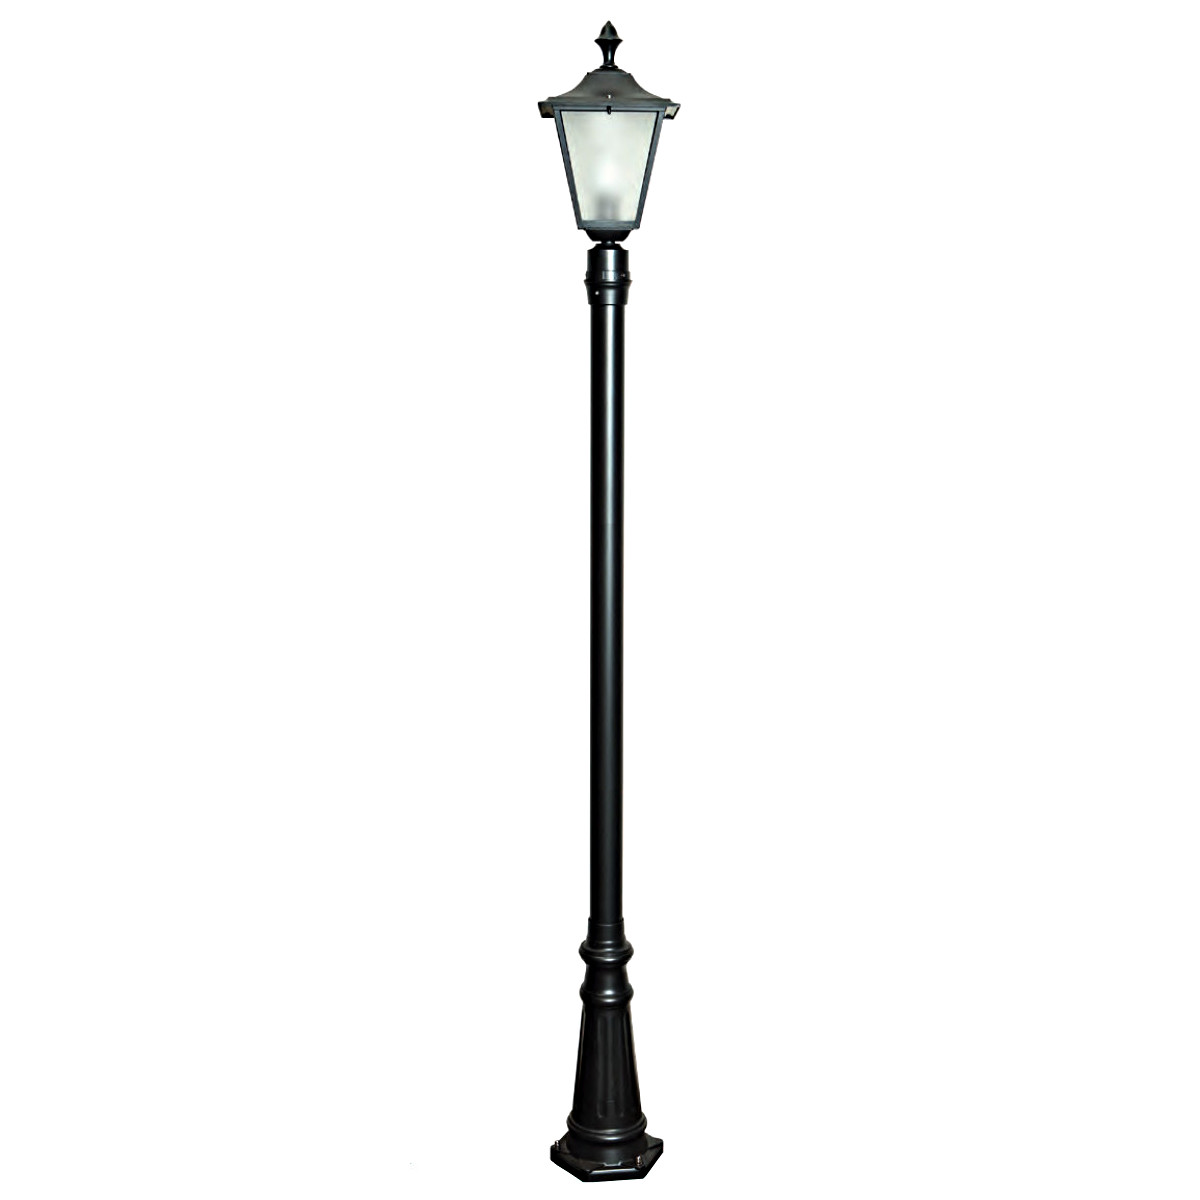 Historic Lamp Post Available in Various Colors